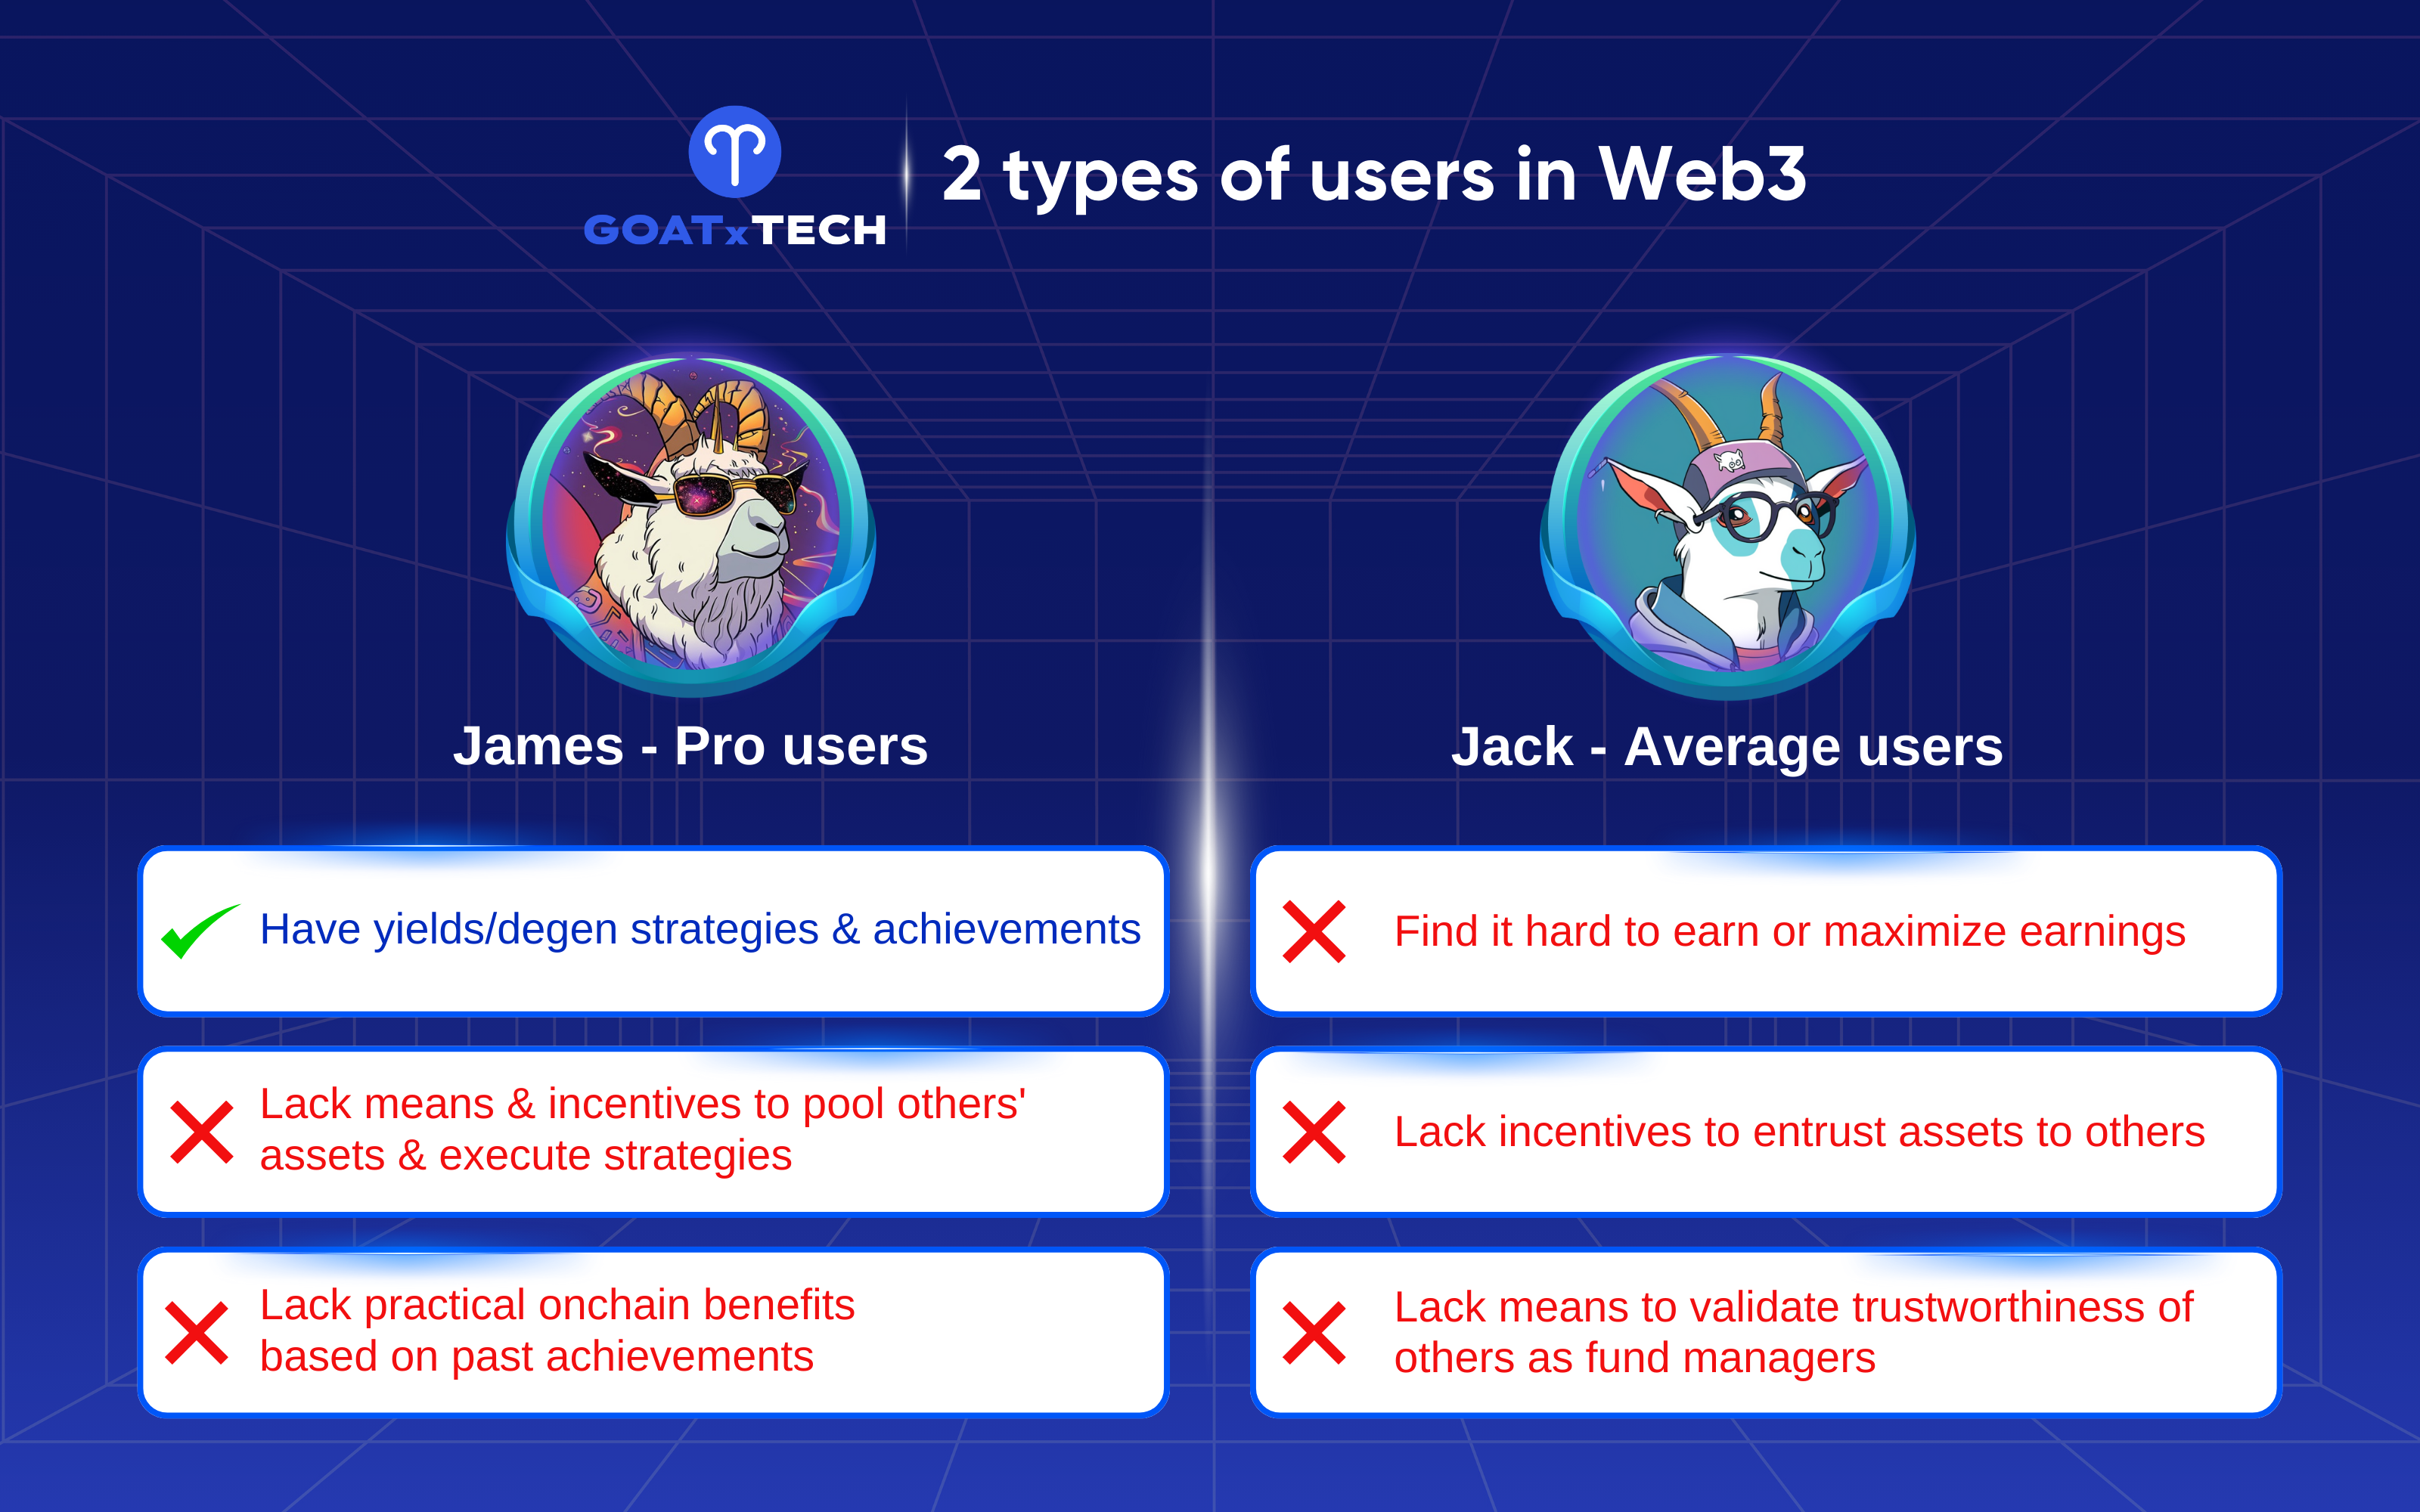 2 types of users in Web3: Pro users and Average users